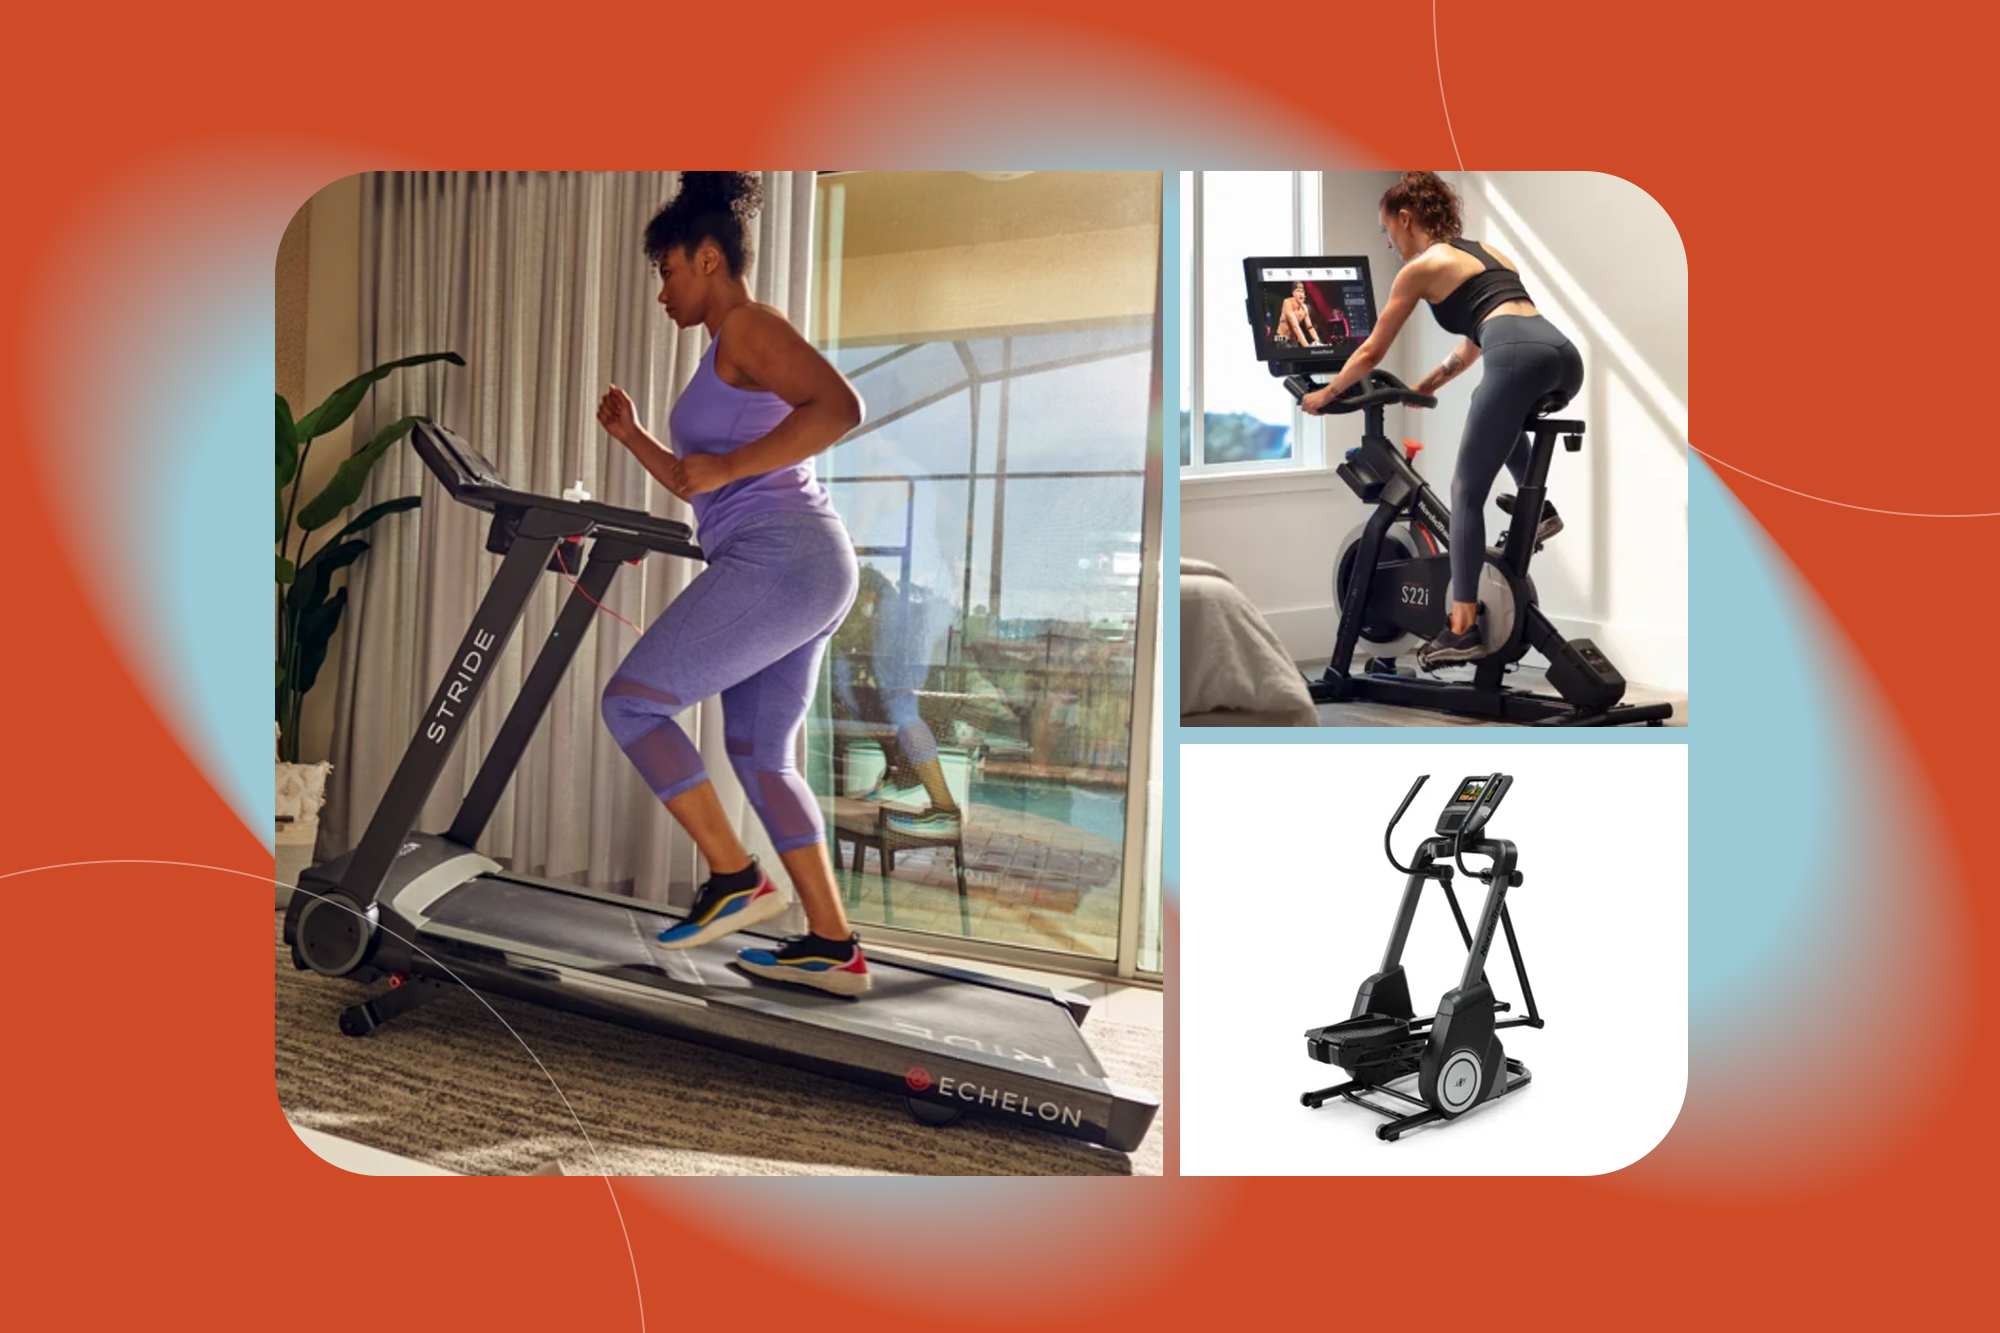 What are the fitness and weight loss equipment available in the gym